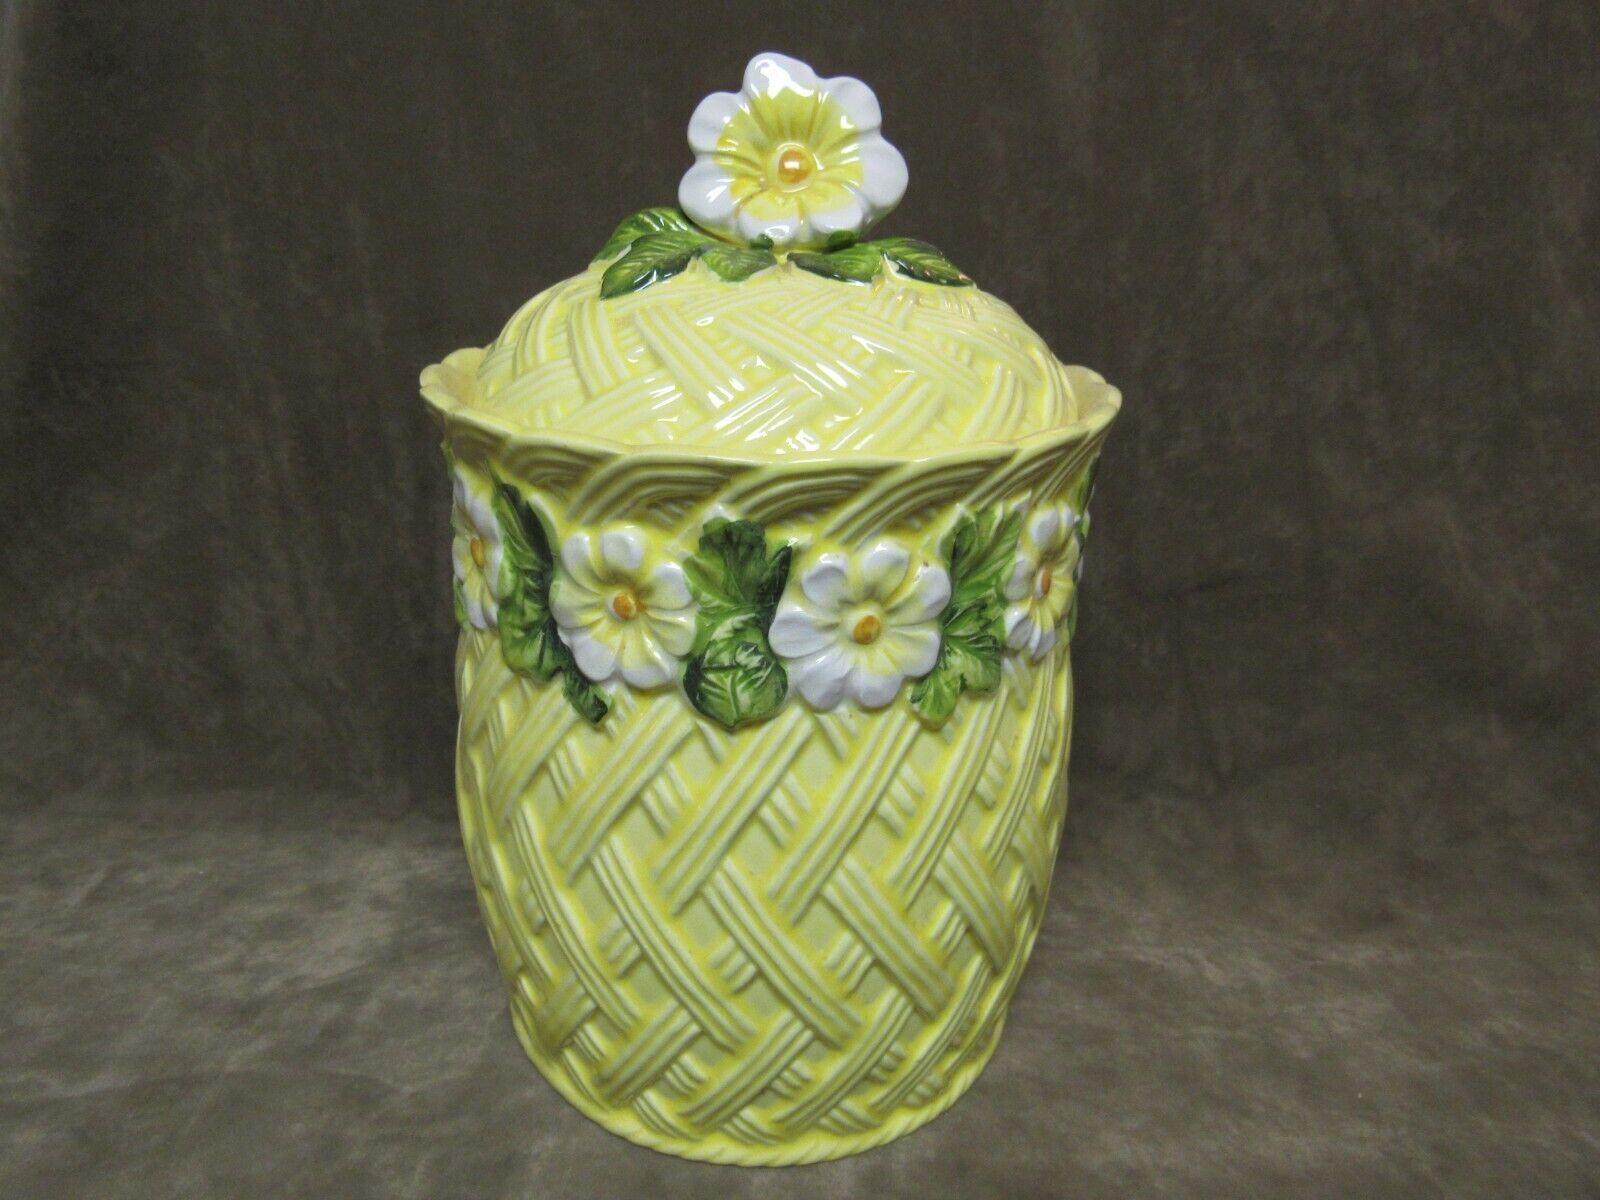 Circa 1970s Lefton China Japan Yellow Lattice White Flower Large Canister w/Lid